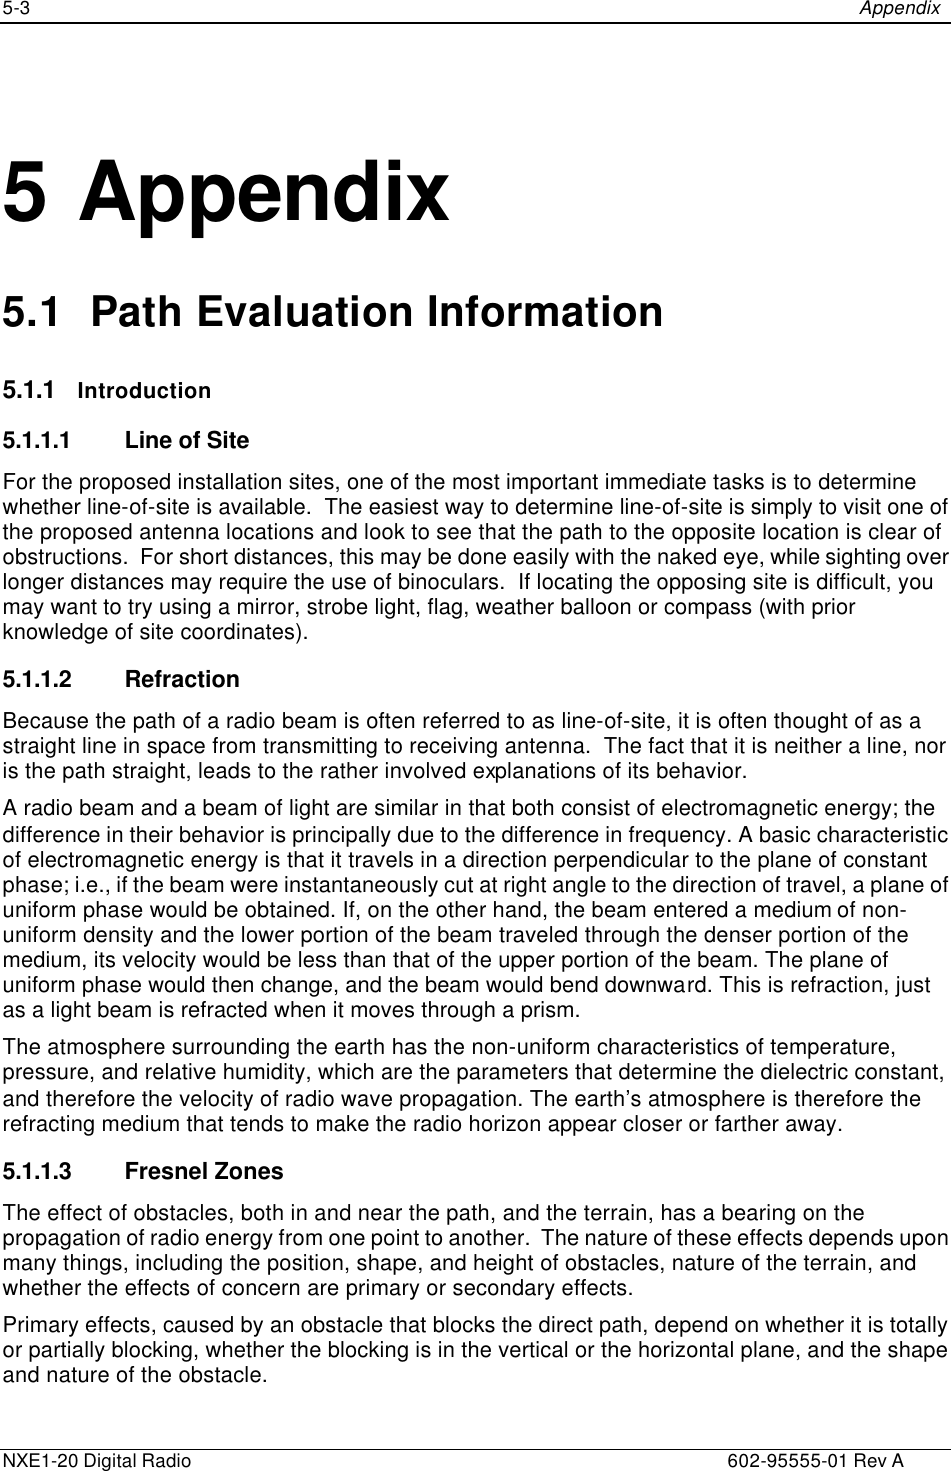 5-3    Appendix  NXE1-20 Digital Radio    602-95555-01 Rev A   5 Appendix 5.1  Path Evaluation Information 5.1.1 Introduction 5.1.1.1 Line of Site For the proposed installation sites, one of the most important immediate tasks is to determine whether line-of-site is available.  The easiest way to determine line-of-site is simply to visit one of the proposed antenna locations and look to see that the path to the opposite location is clear of obstructions.  For short distances, this may be done easily with the naked eye, while sighting over longer distances may require the use of binoculars.  If locating the opposing site is difficult, you may want to try using a mirror, strobe light, flag, weather balloon or compass (with prior knowledge of site coordinates). 5.1.1.2 Refraction Because the path of a radio beam is often referred to as line-of-site, it is often thought of as a straight line in space from transmitting to receiving antenna.  The fact that it is neither a line, nor is the path straight, leads to the rather involved explanations of its behavior. A radio beam and a beam of light are similar in that both consist of electromagnetic energy; the difference in their behavior is principally due to the difference in frequency. A basic characteristic of electromagnetic energy is that it travels in a direction perpendicular to the plane of constant phase; i.e., if the beam were instantaneously cut at right angle to the direction of travel, a plane of uniform phase would be obtained. If, on the other hand, the beam entered a medium of non-uniform density and the lower portion of the beam traveled through the denser portion of the medium, its velocity would be less than that of the upper portion of the beam. The plane of uniform phase would then change, and the beam would bend downward. This is refraction, just as a light beam is refracted when it moves through a prism. The atmosphere surrounding the earth has the non-uniform characteristics of temperature, pressure, and relative humidity, which are the parameters that determine the dielectric constant, and therefore the velocity of radio wave propagation. The earth’s atmosphere is therefore the refracting medium that tends to make the radio horizon appear closer or farther away.  5.1.1.3 Fresnel Zones The effect of obstacles, both in and near the path, and the terrain, has a bearing on the propagation of radio energy from one point to another.  The nature of these effects depends upon many things, including the position, shape, and height of obstacles, nature of the terrain, and whether the effects of concern are primary or secondary effects. Primary effects, caused by an obstacle that blocks the direct path, depend on whether it is totally or partially blocking, whether the blocking is in the vertical or the horizontal plane, and the shape and nature of the obstacle. 